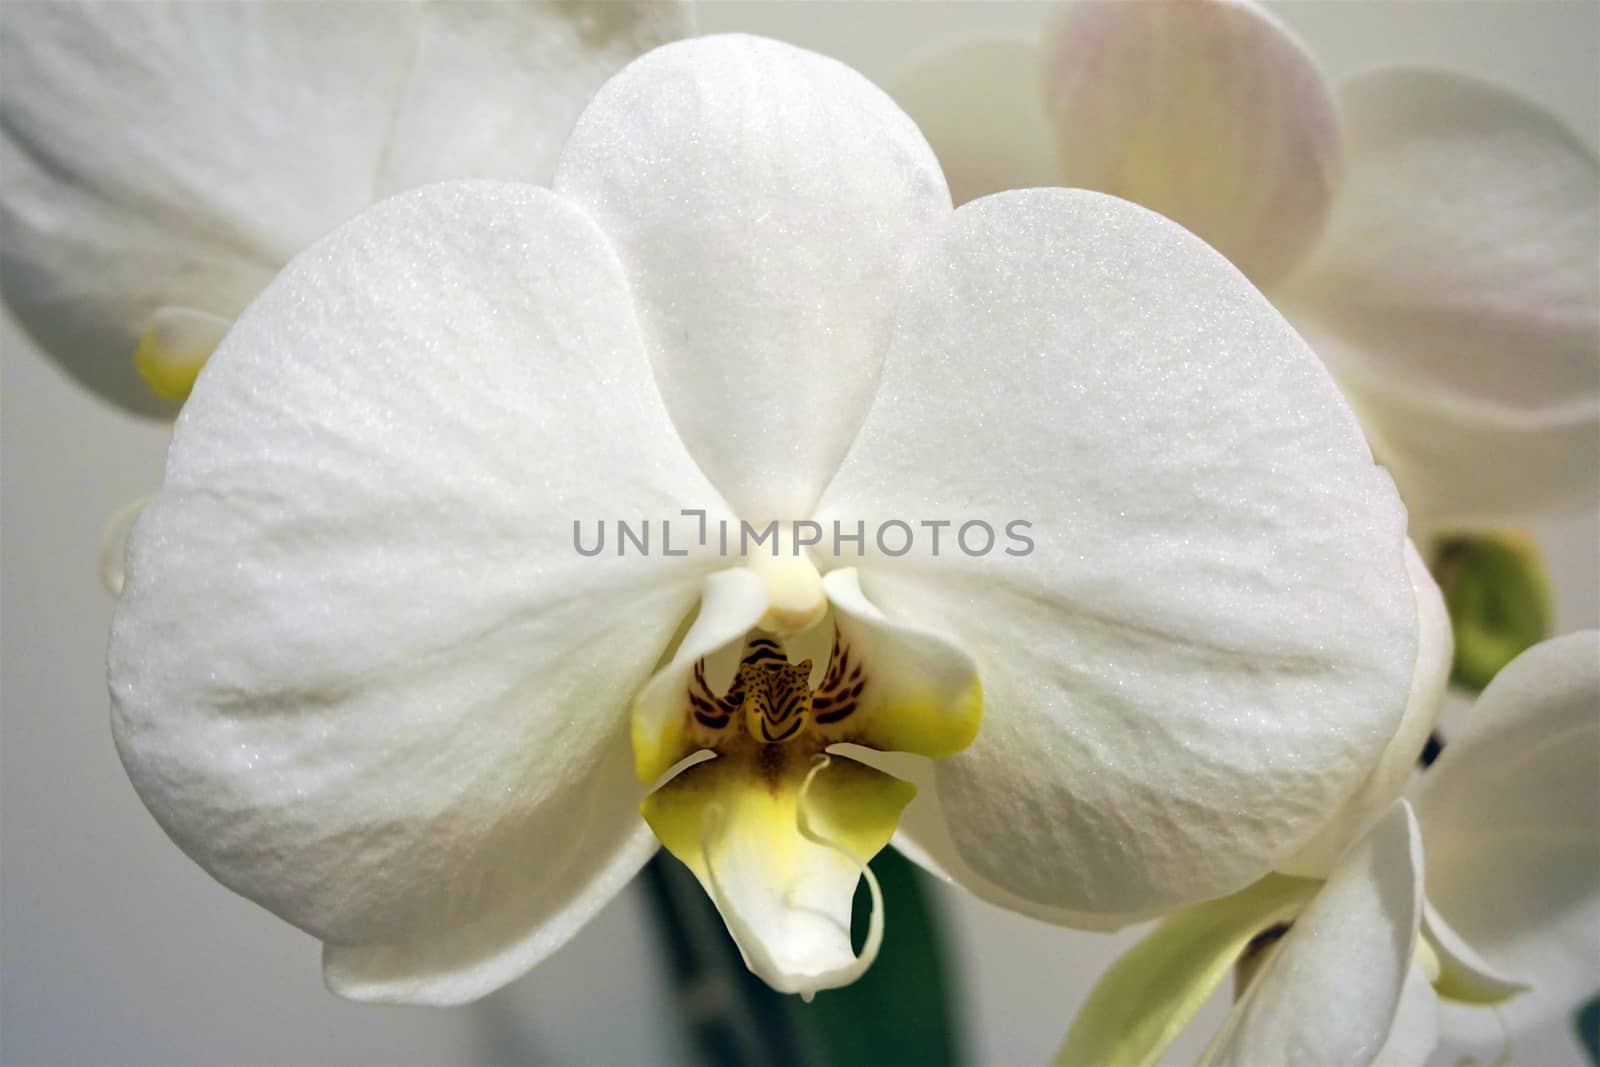 Closeup of a white Phalaenopsis orchid blossom